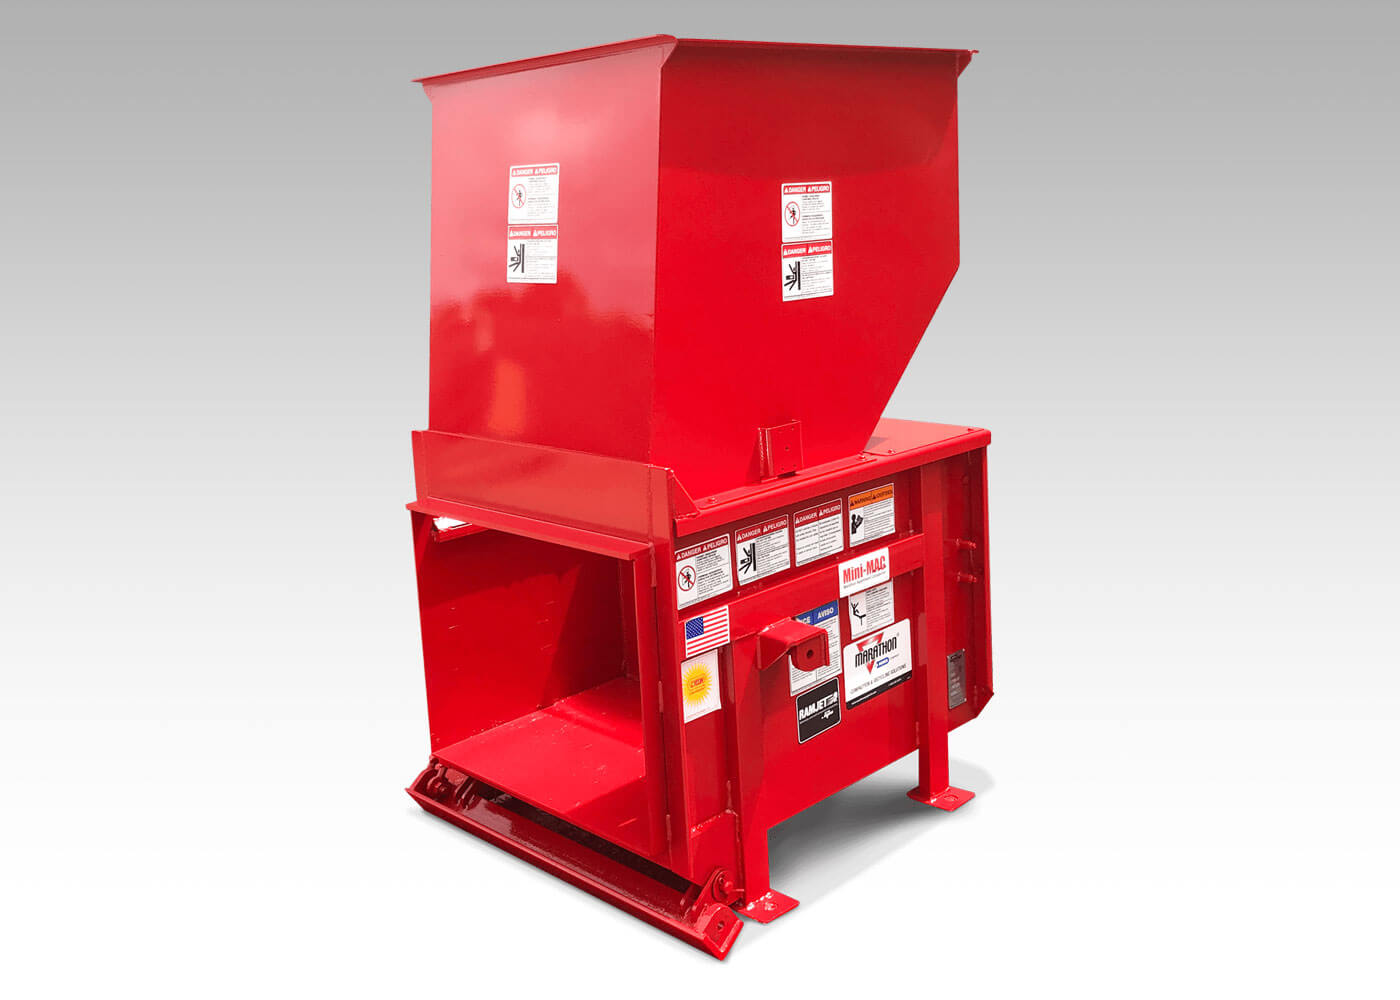 Compact trash compactors for apartments and residental apartment buildings